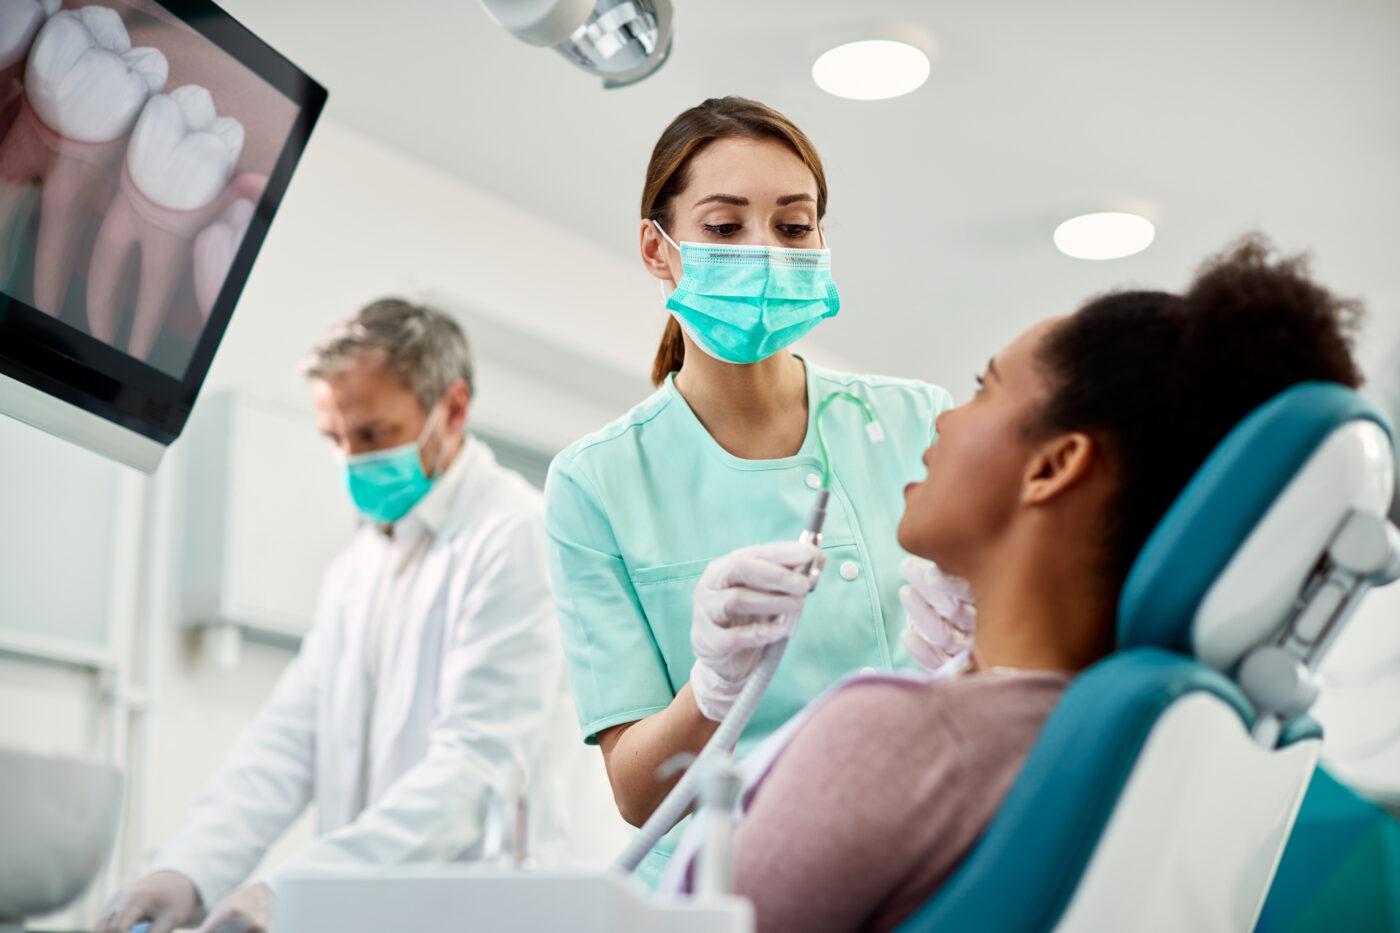 What Is the Easiest Dental Specialty to Get Into?